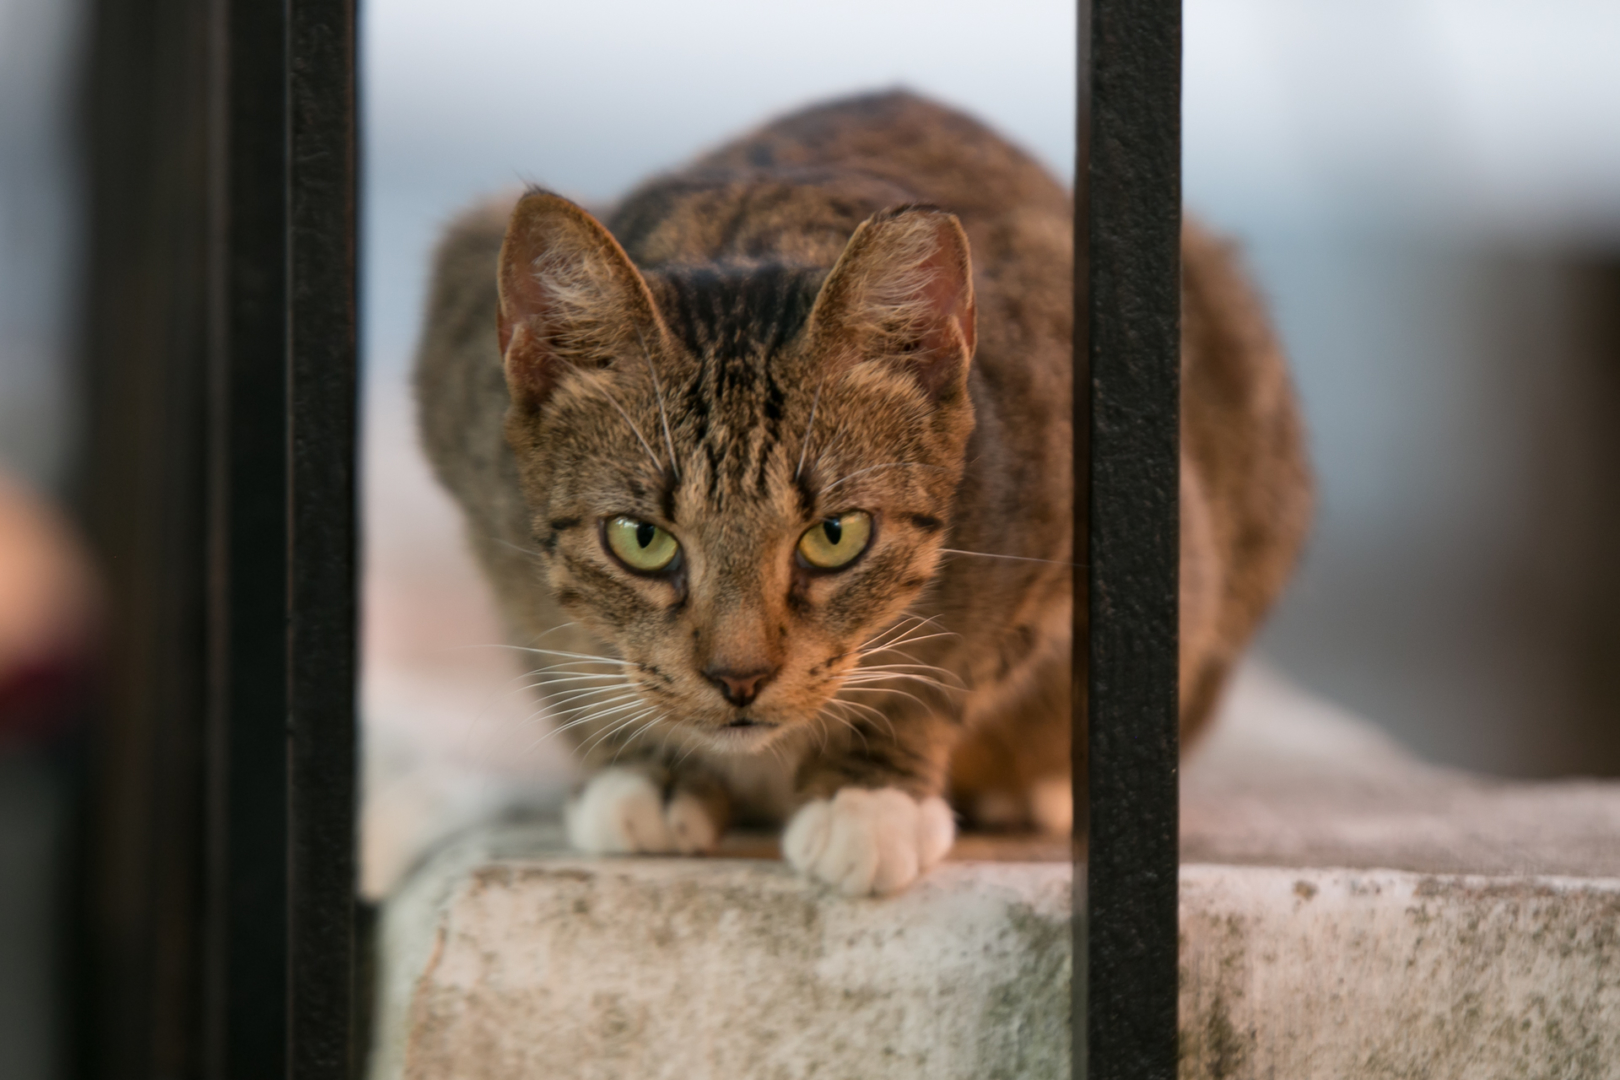 Momma, one of the many stray cats on campus, is perched on a ledge in September 2019 at Agnes Arnold Hall. The feline, the founder of Campus Cat Fans said, was one of two to "move" on campus after Hurricane Harvey in 2017. | Claudette Vega/The Cougar